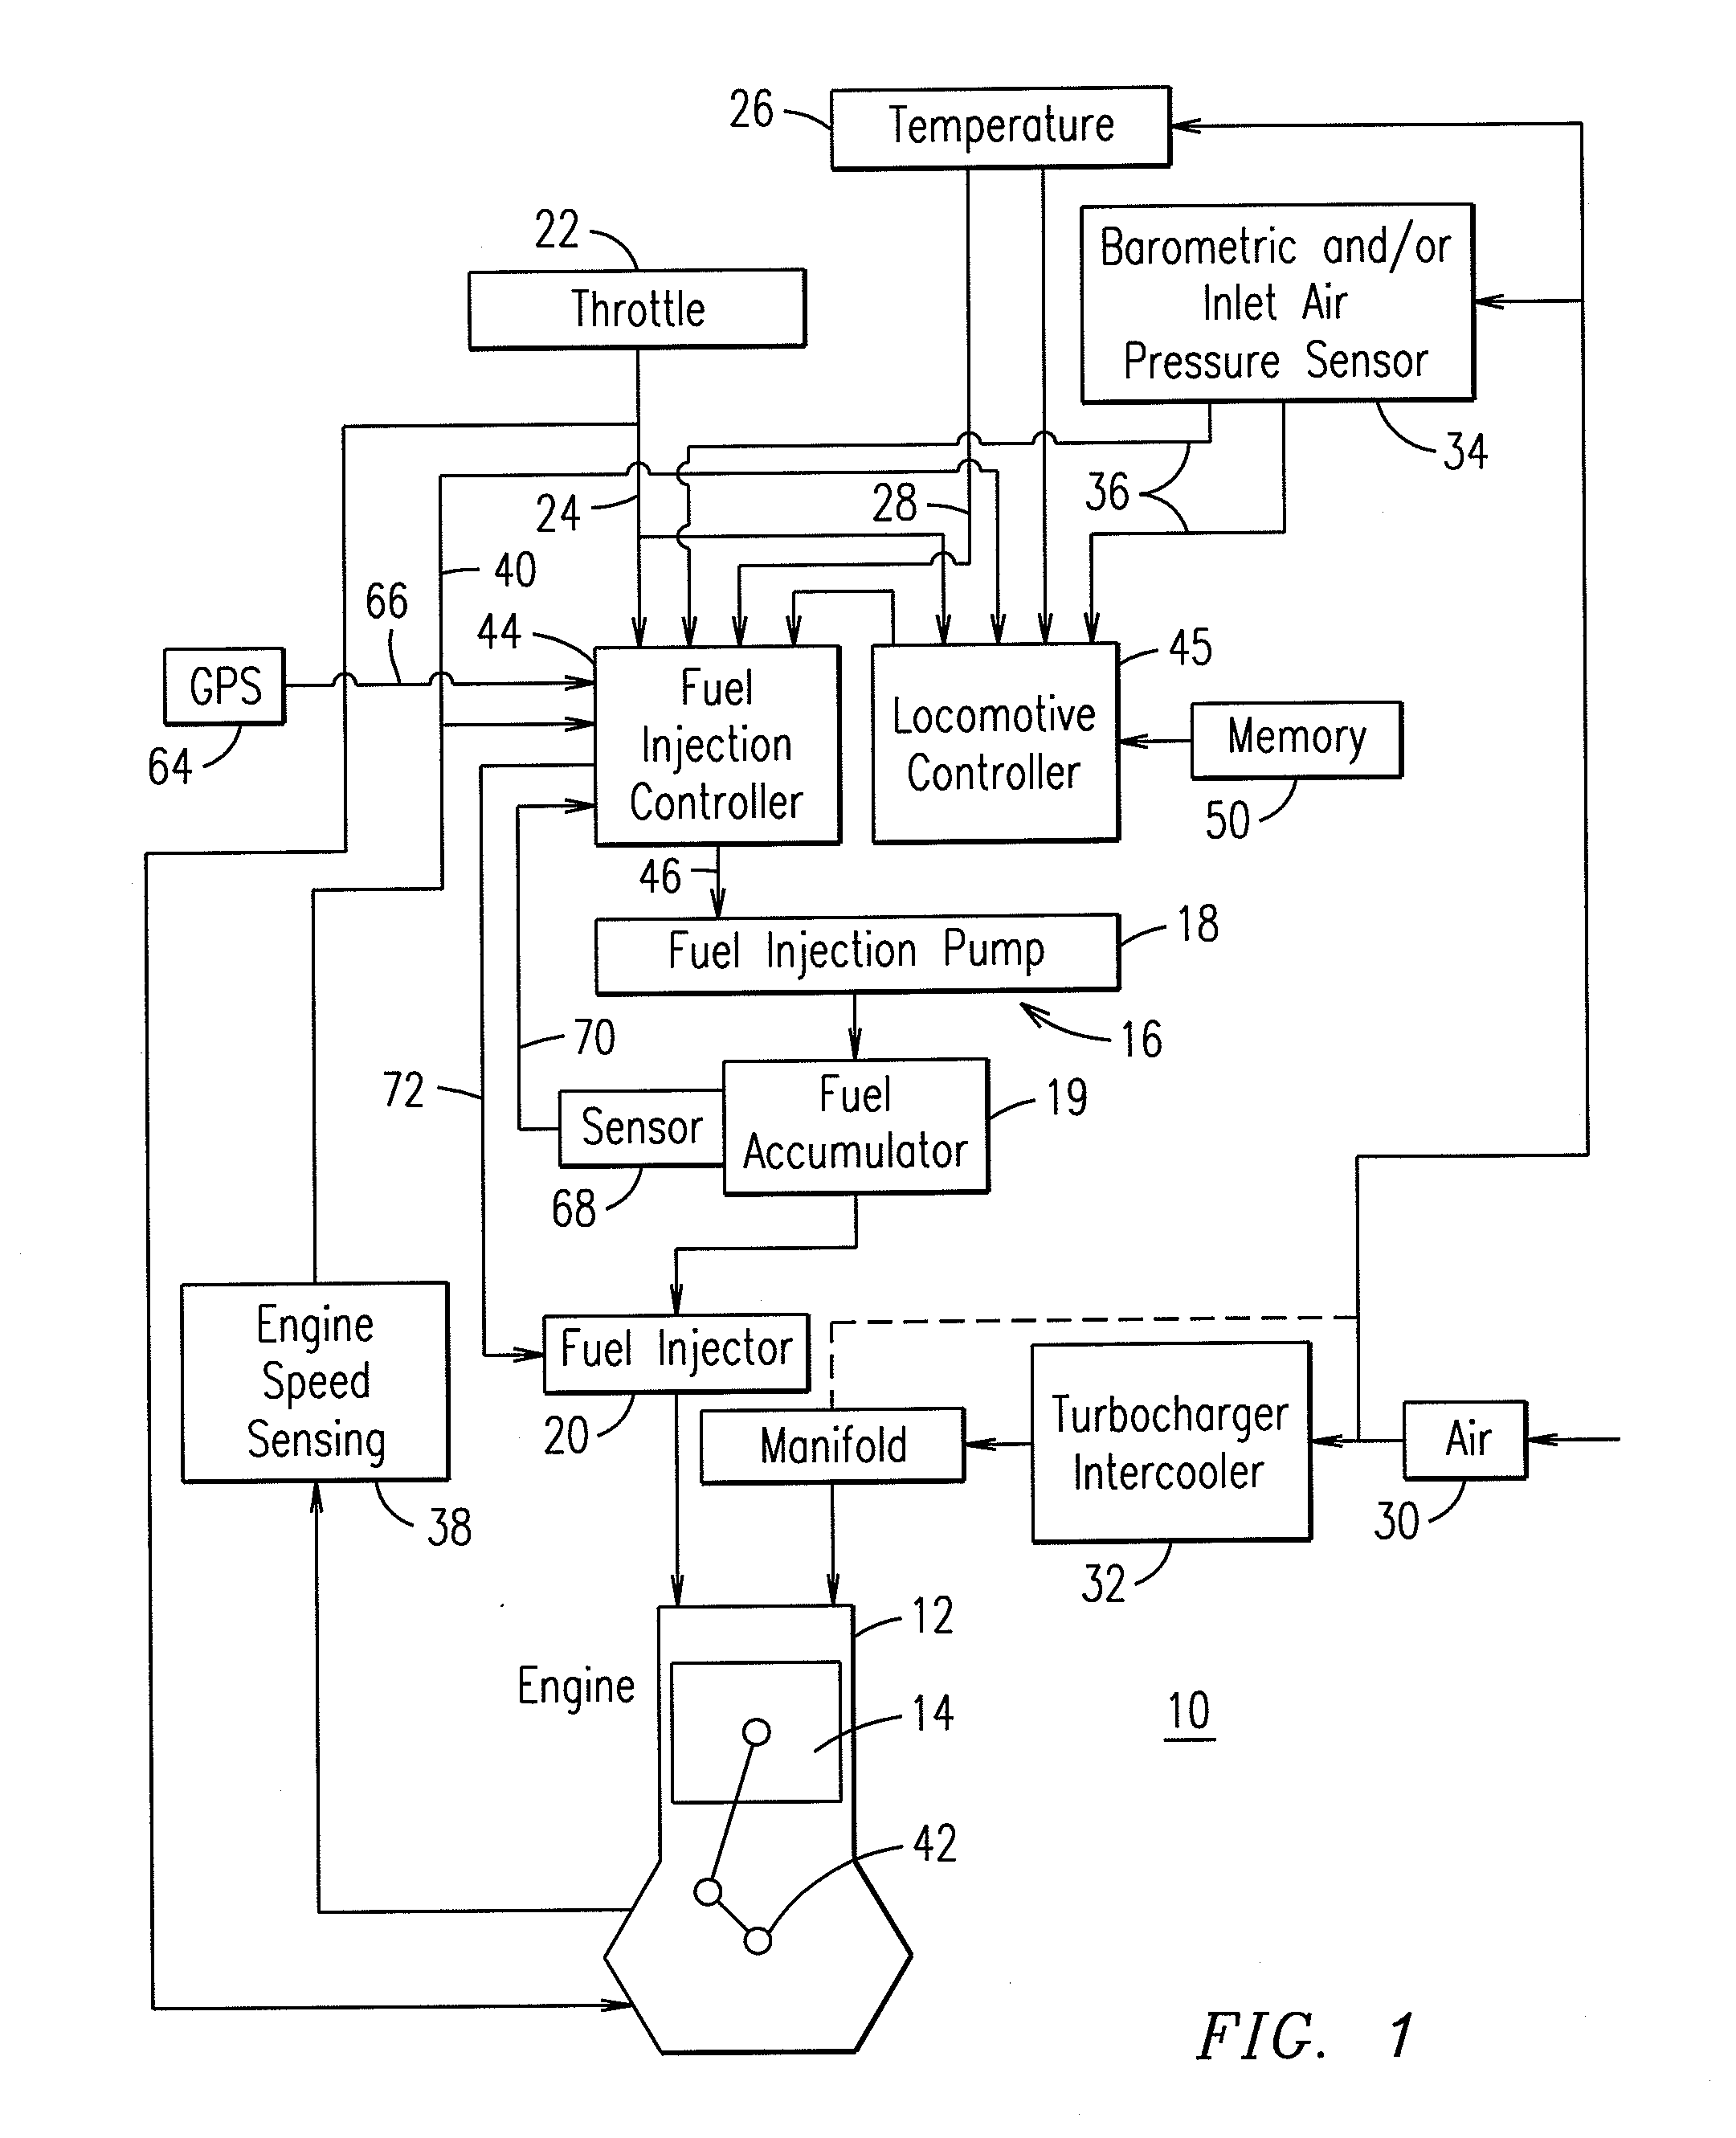 System and method for controlling the fuel injection event in an internal combustion engine